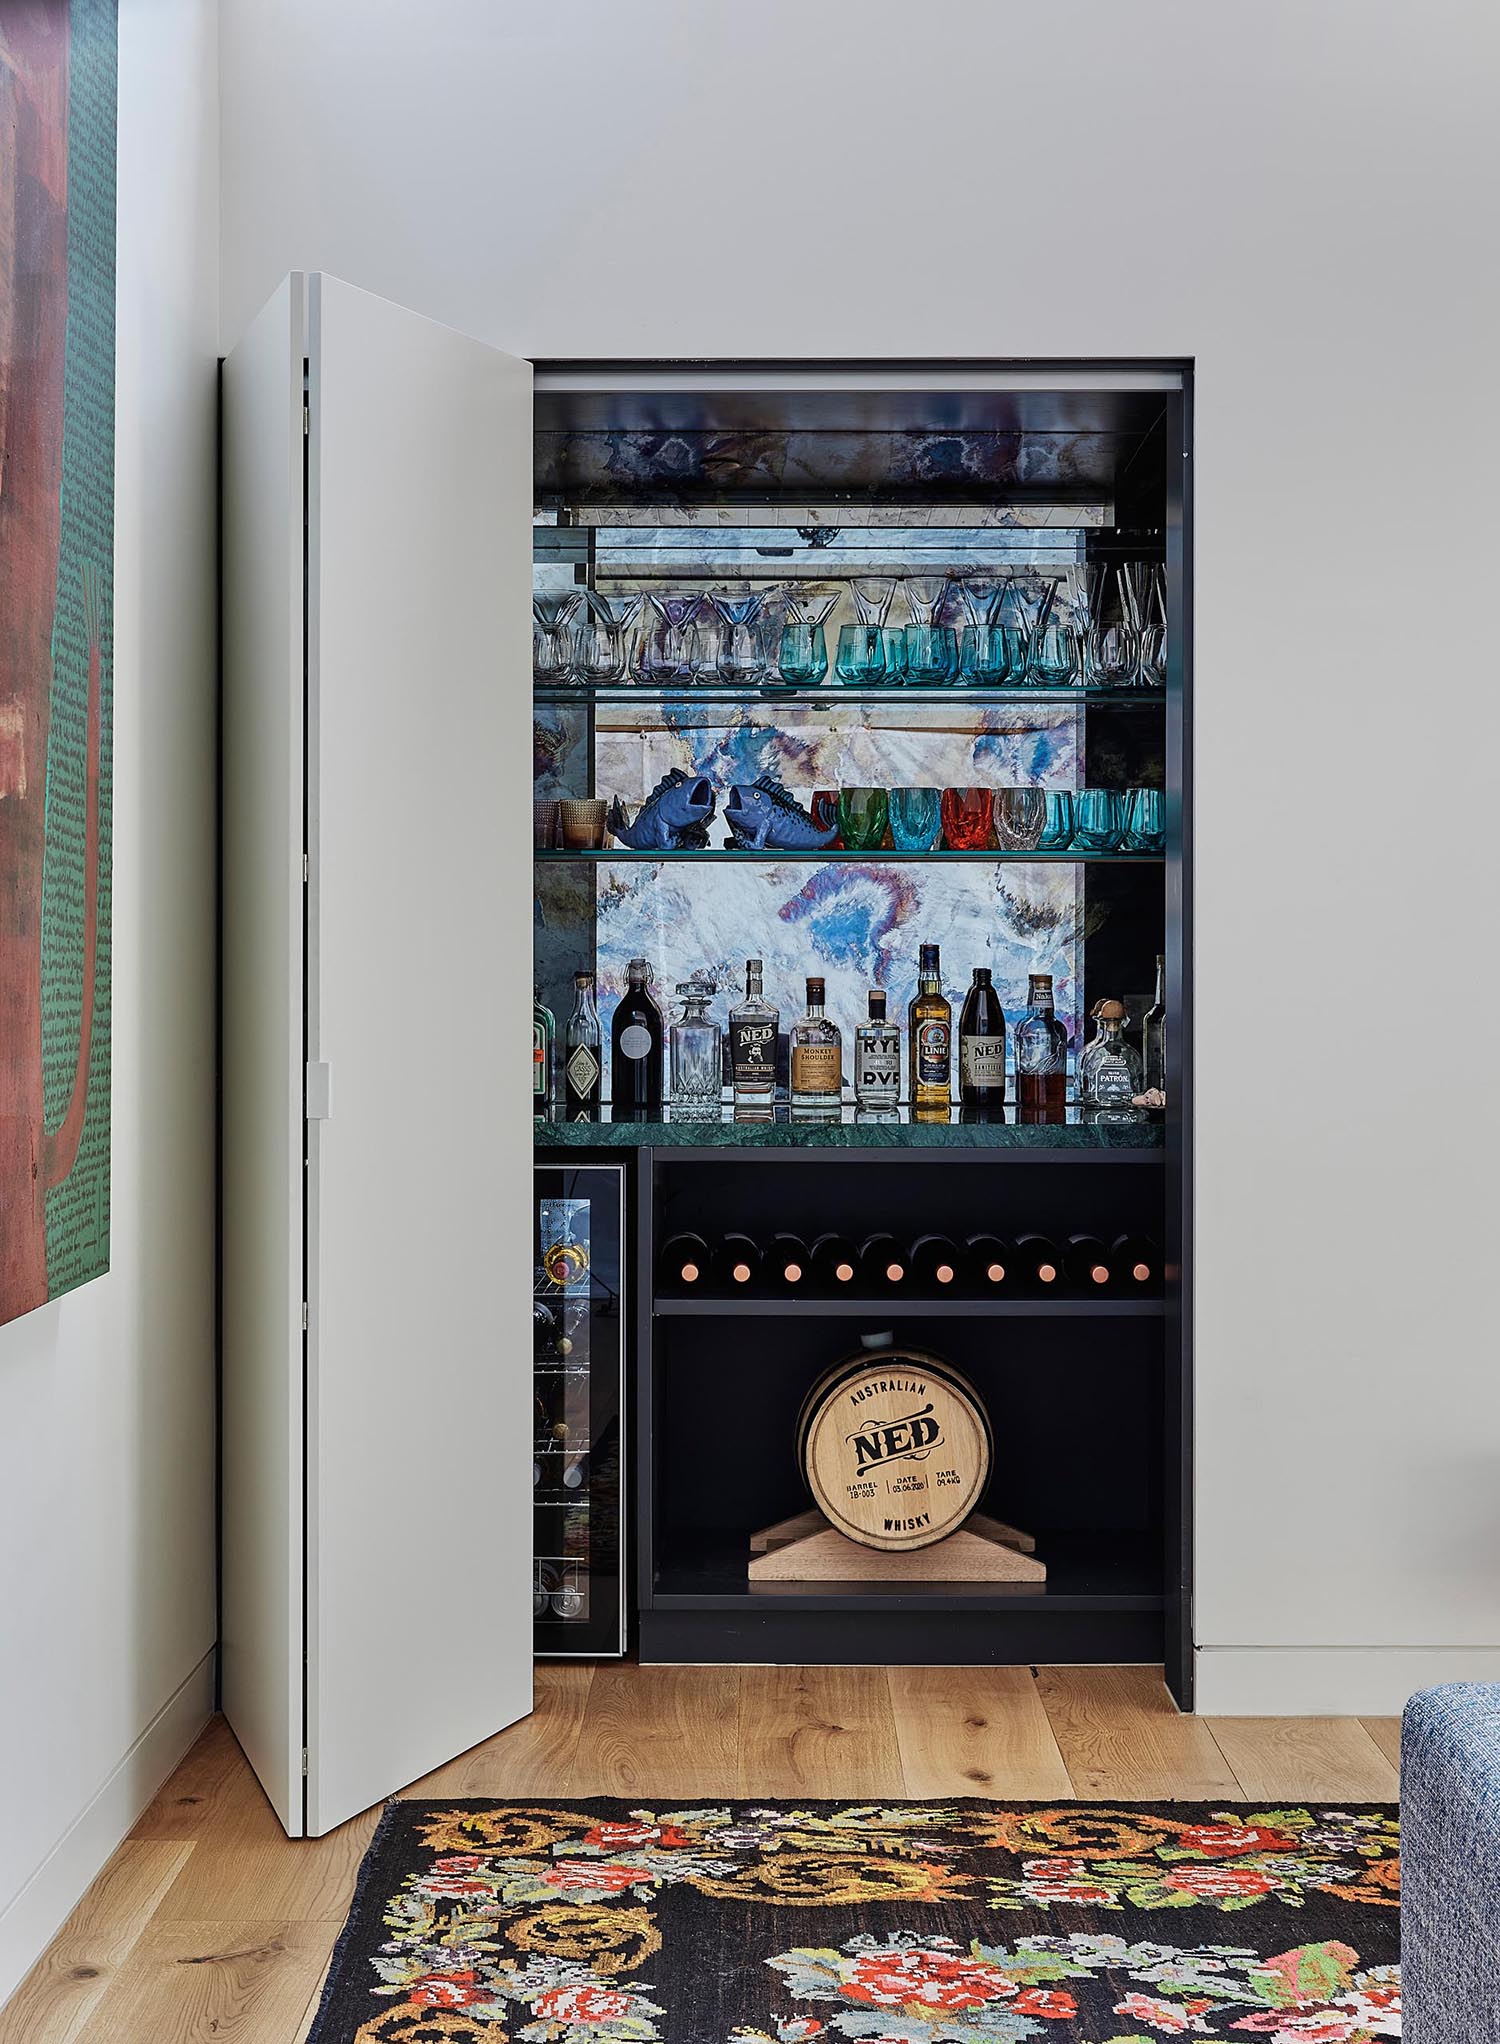 A home bar is hidden behind a closet in the living room, and includes a small fridge, bottle storage, and shelving for displaying glassware.